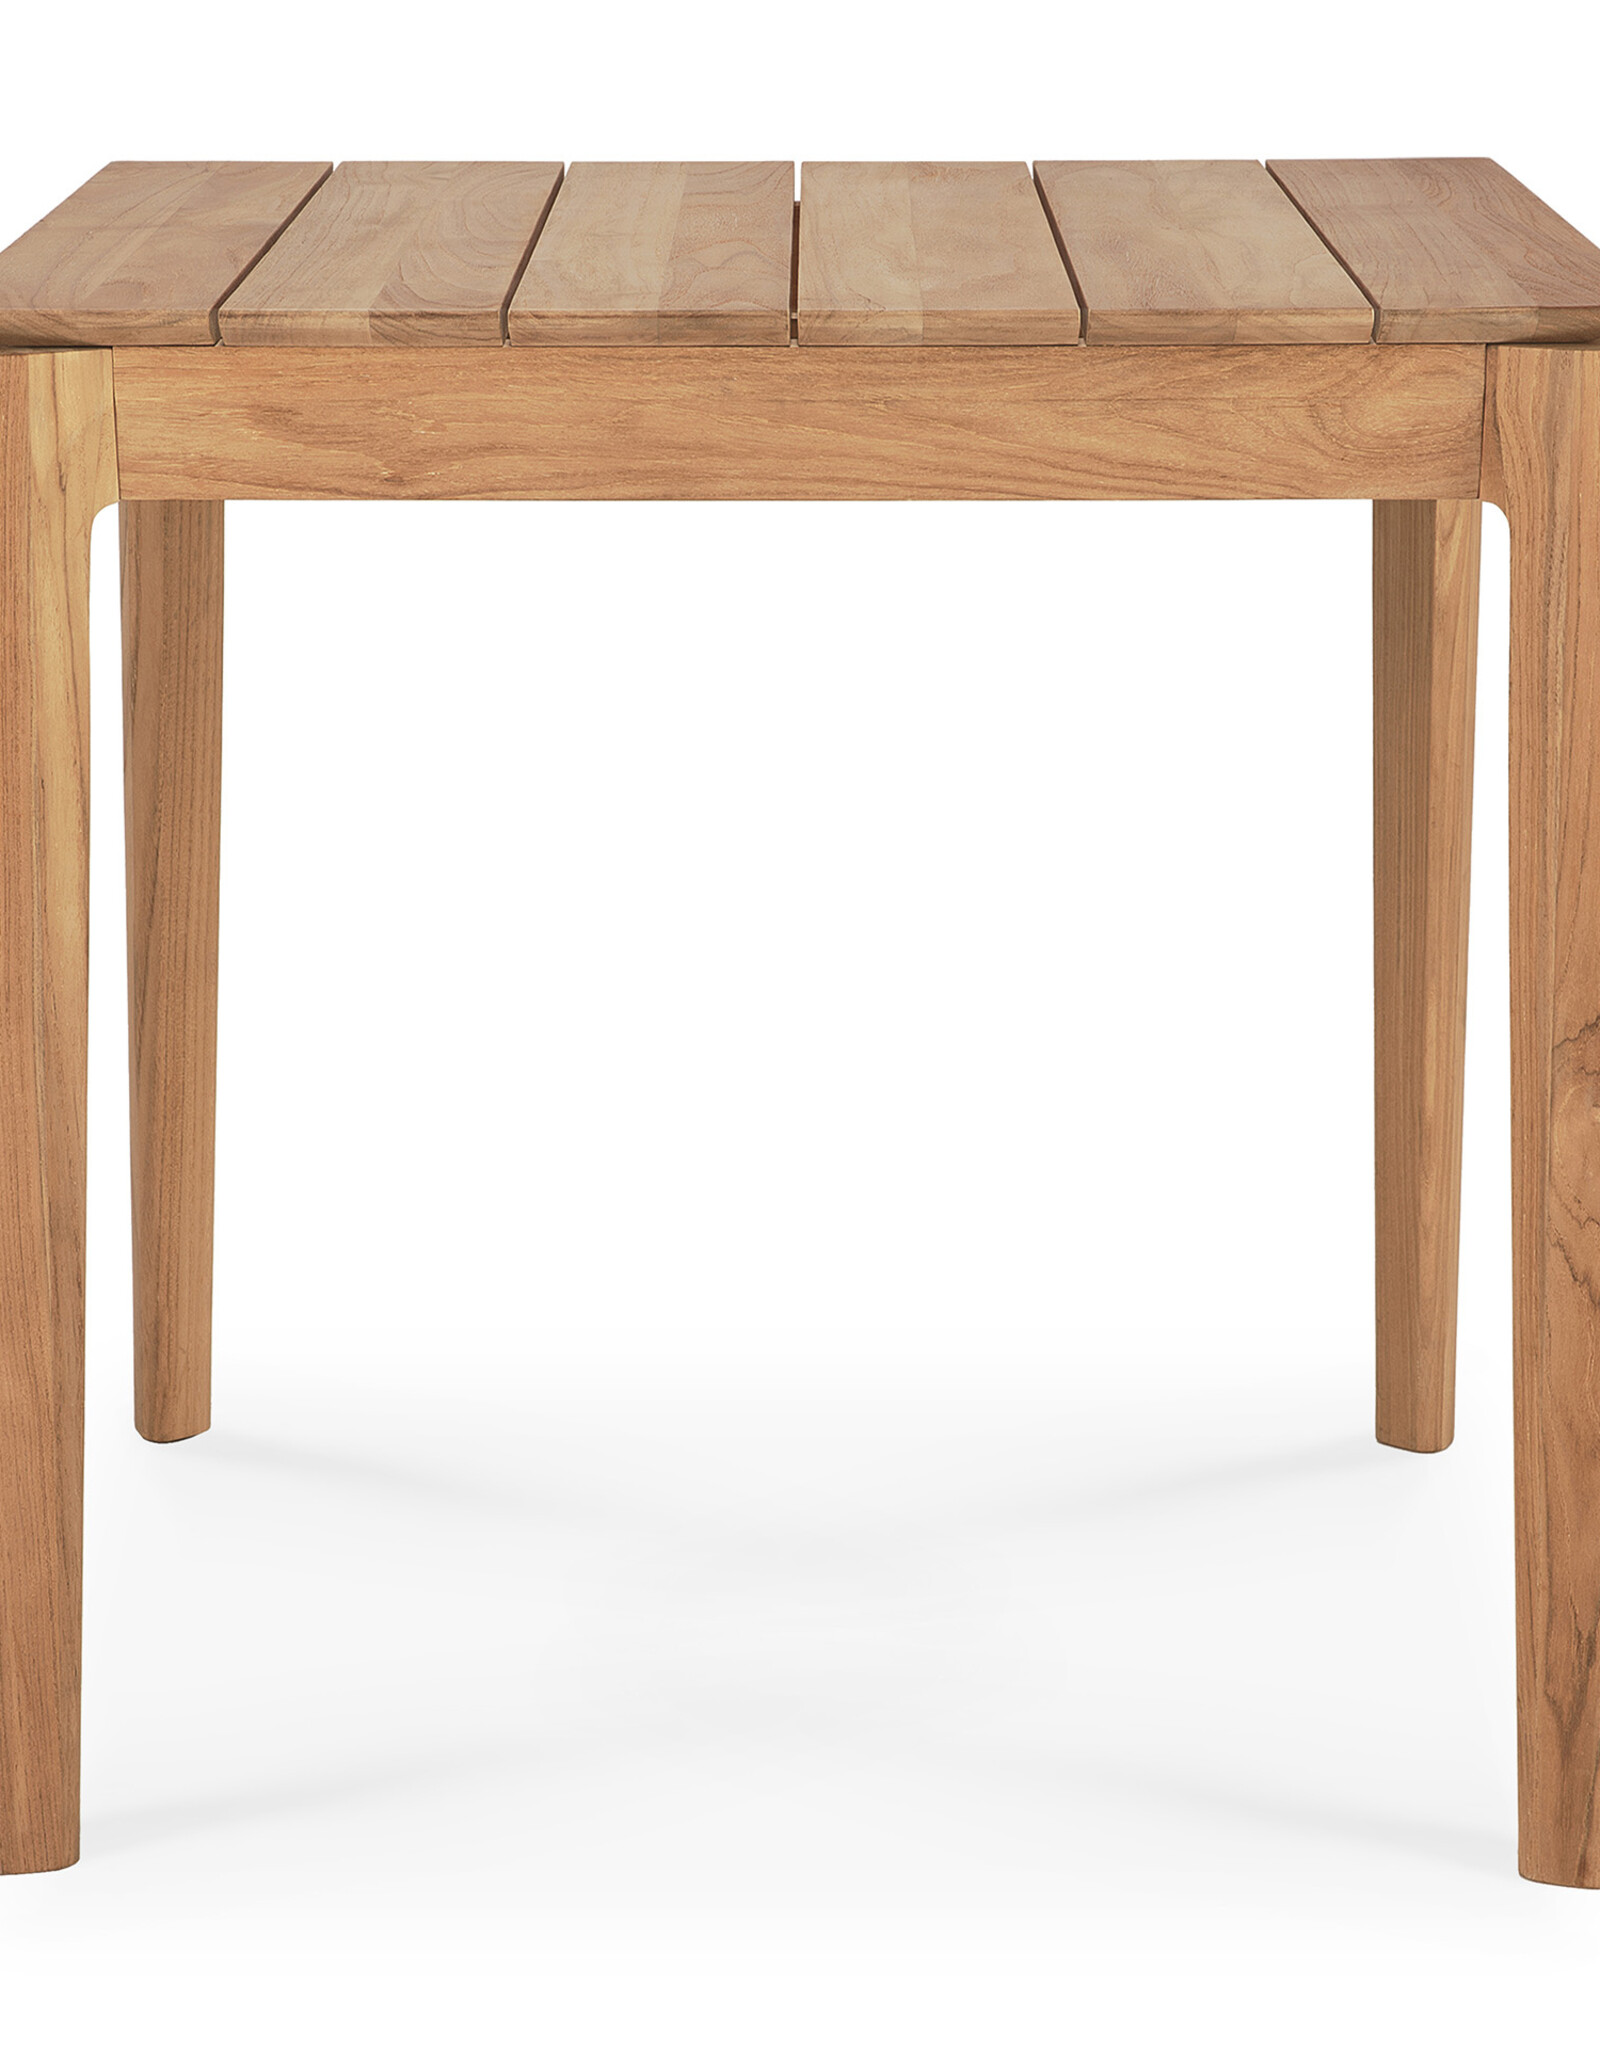 Bok Outdoor Dining Table - Teak - Square